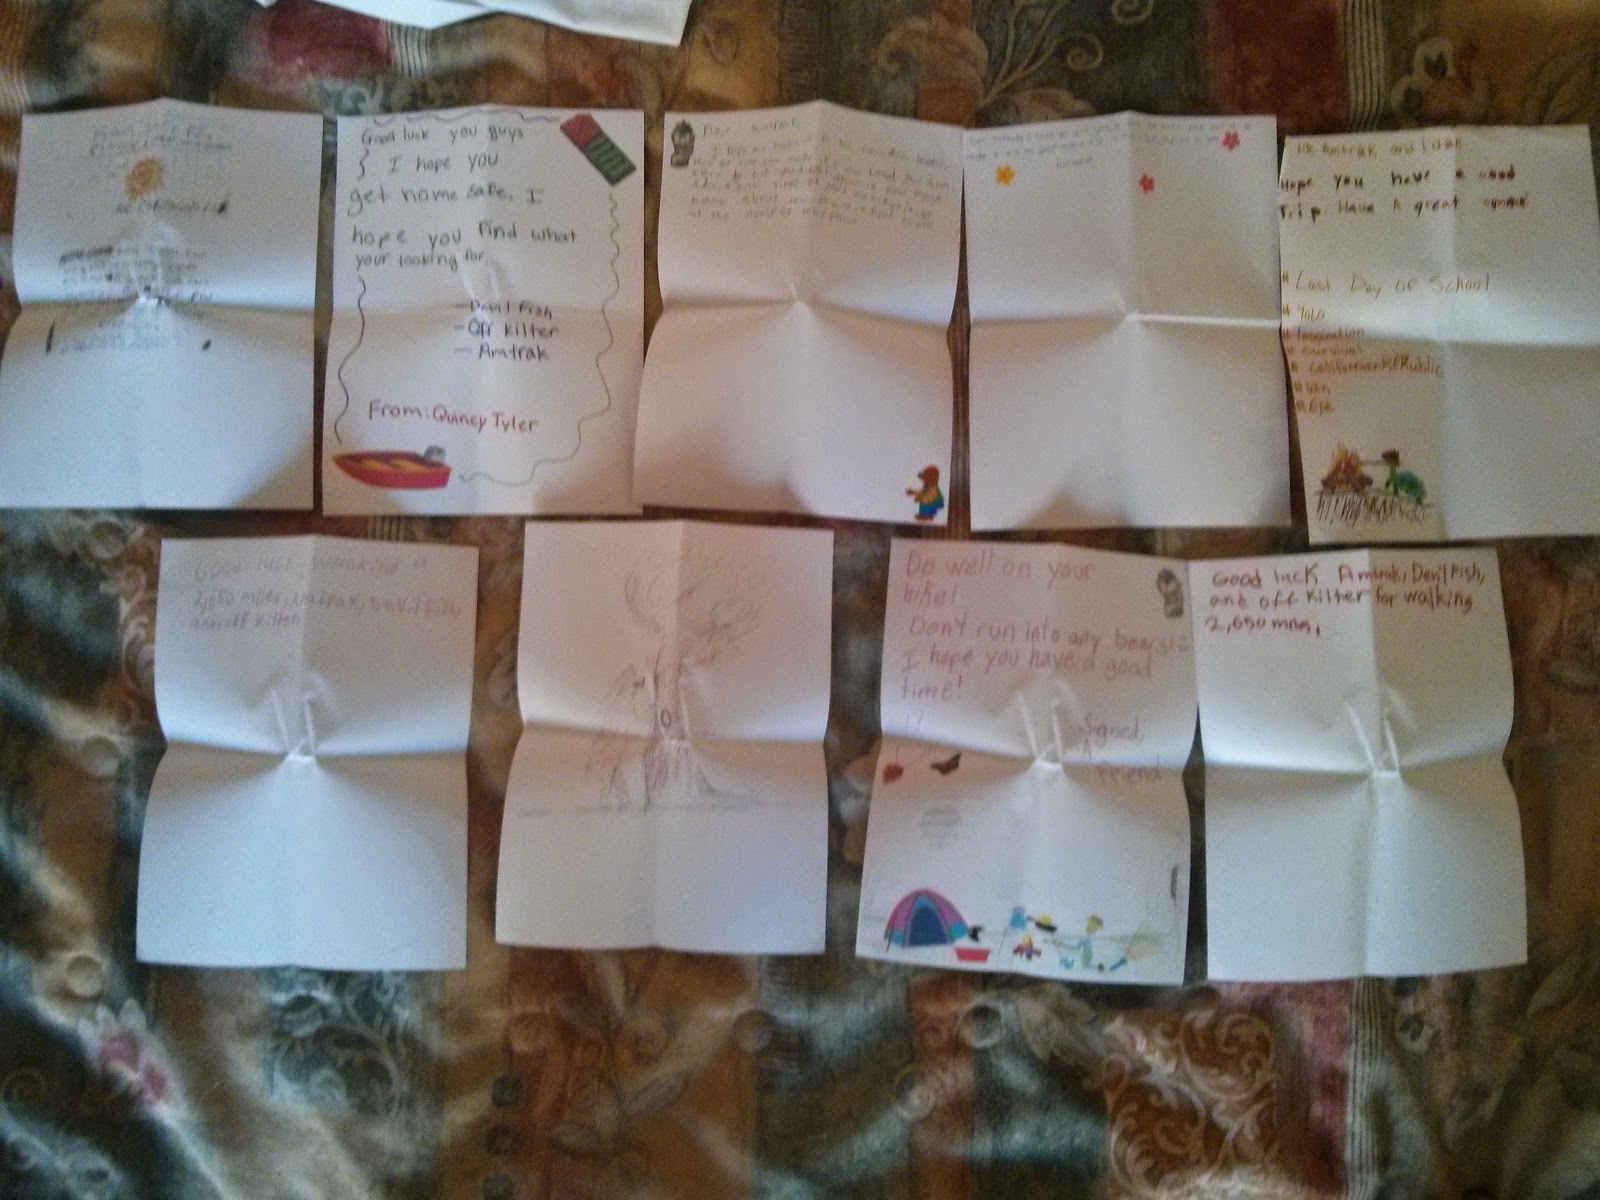 The letters we got from a Helen's class.